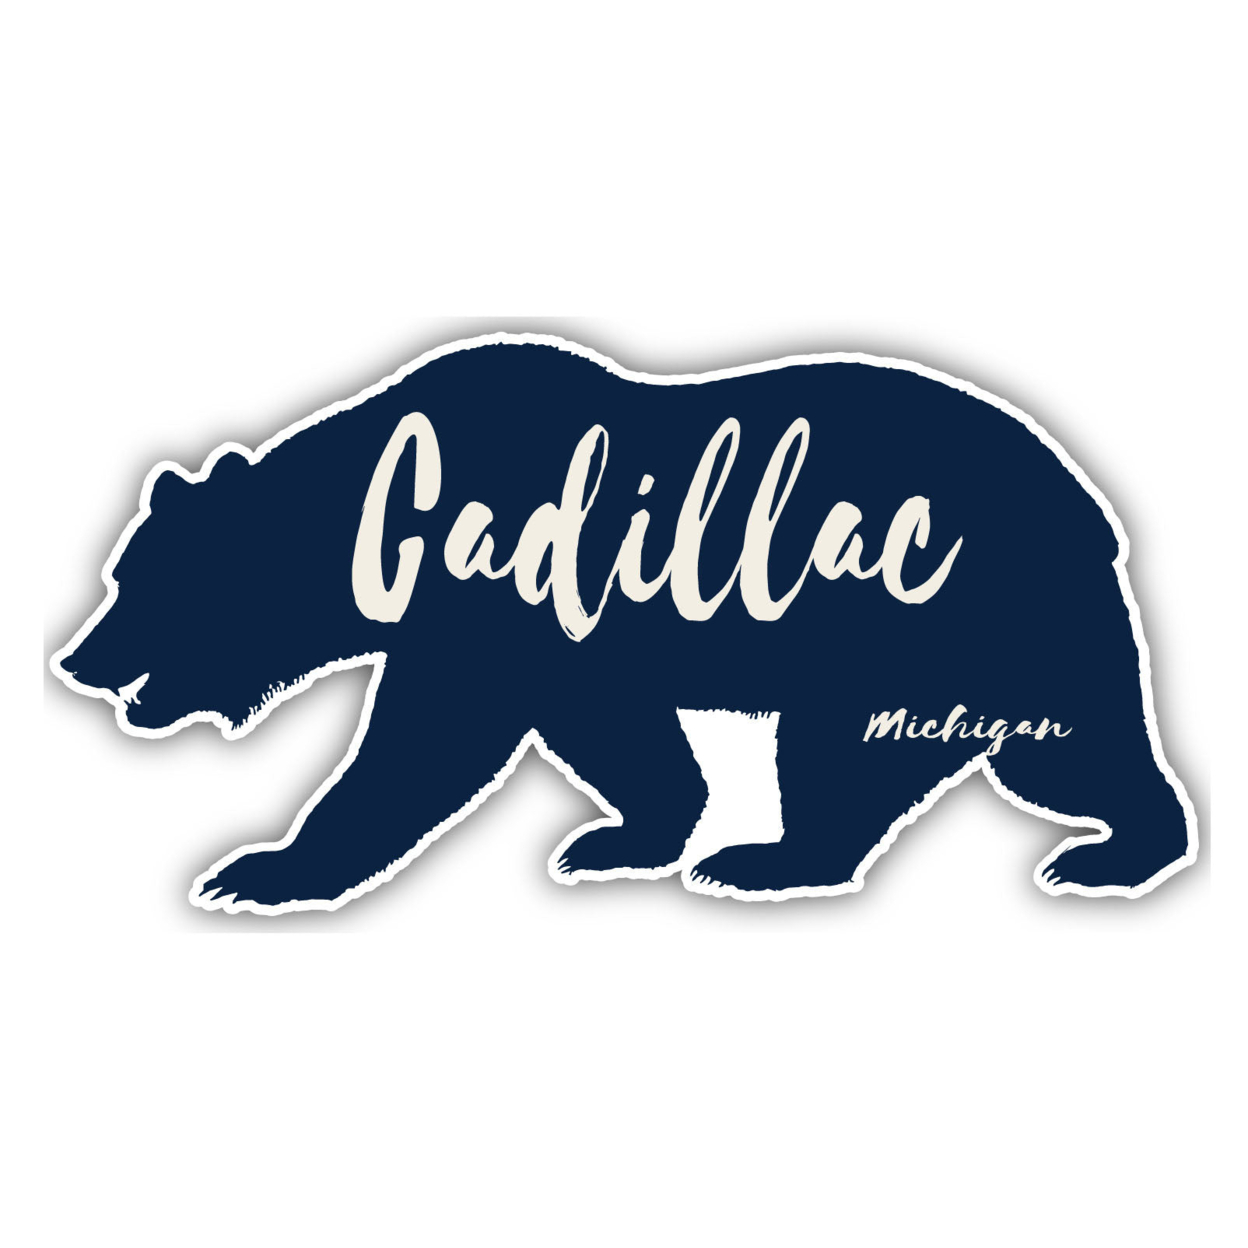 Cadillac Michigan Souvenir Decorative Stickers (Choose Theme And Size) - 4-Pack, 10-Inch, Bear